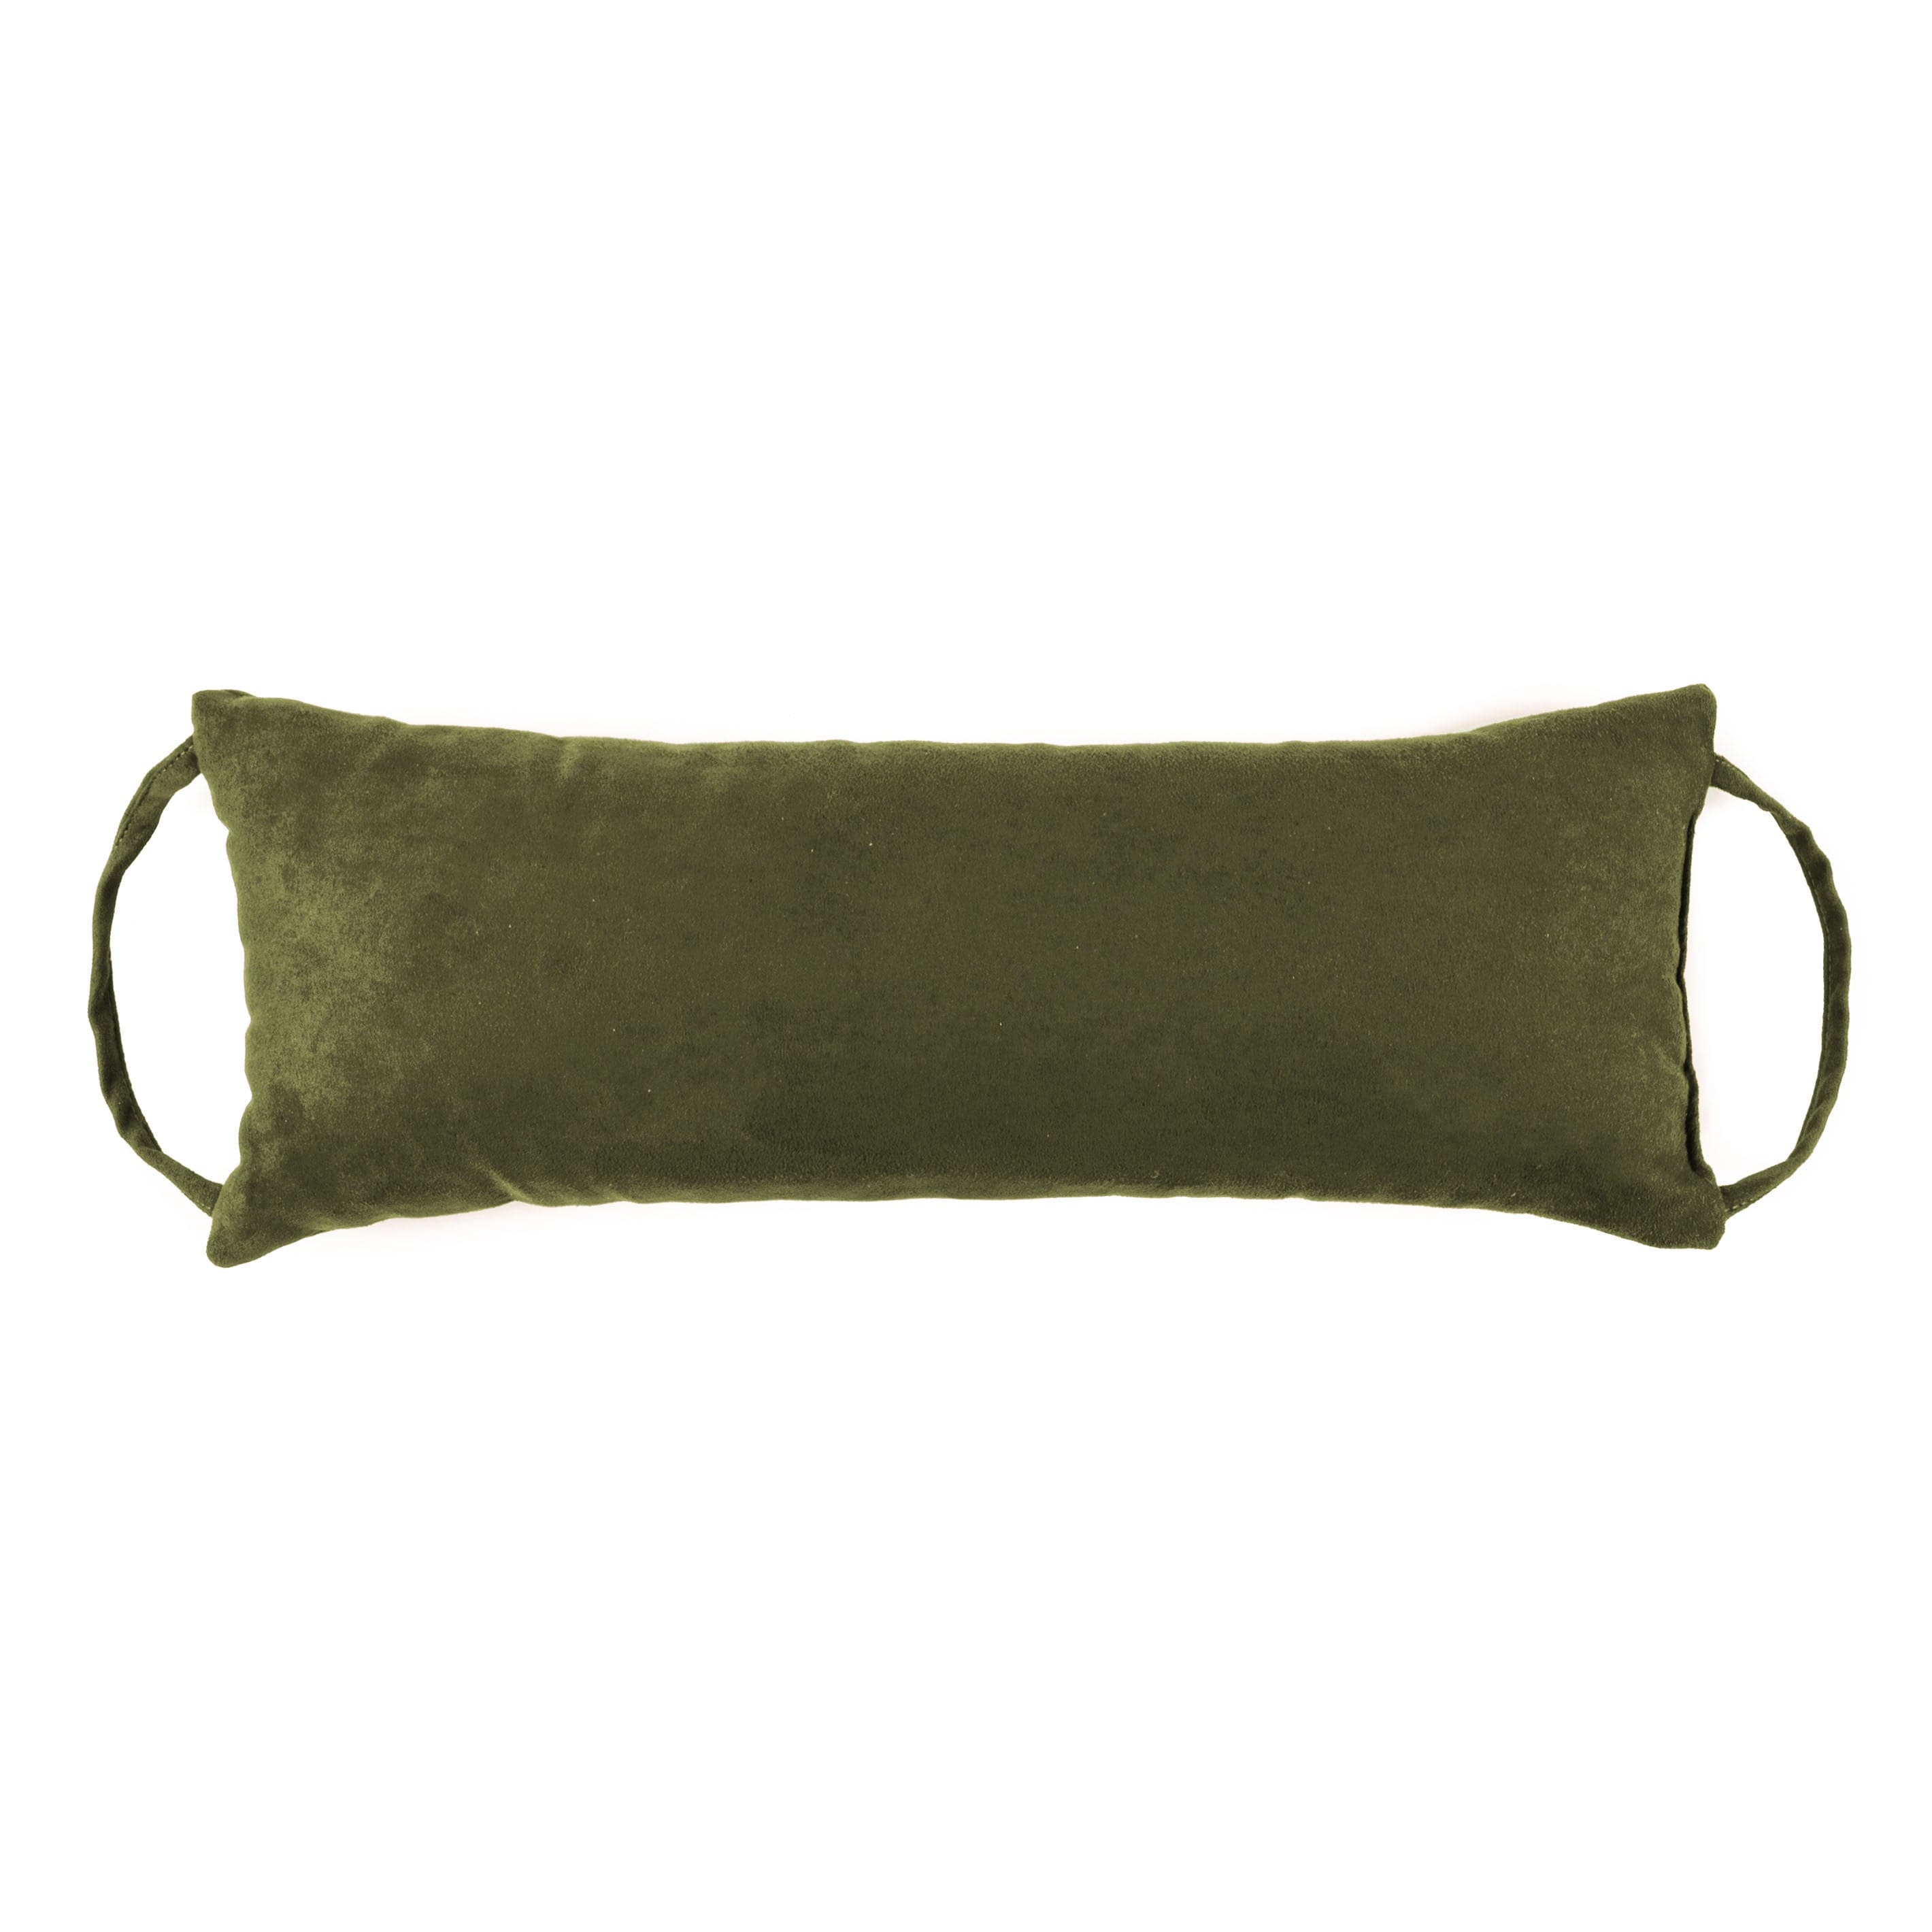 http://barnetthomedecor.com/cdn/shop/products/Neck_Roll_Travel_Pillow_-_Micro-Suede_Laurel_Green_-_Barnett_Home_Decor_f1f04276-cb9e-4dea-88c2-e1357b4d22e4.jpg?v=1651117461